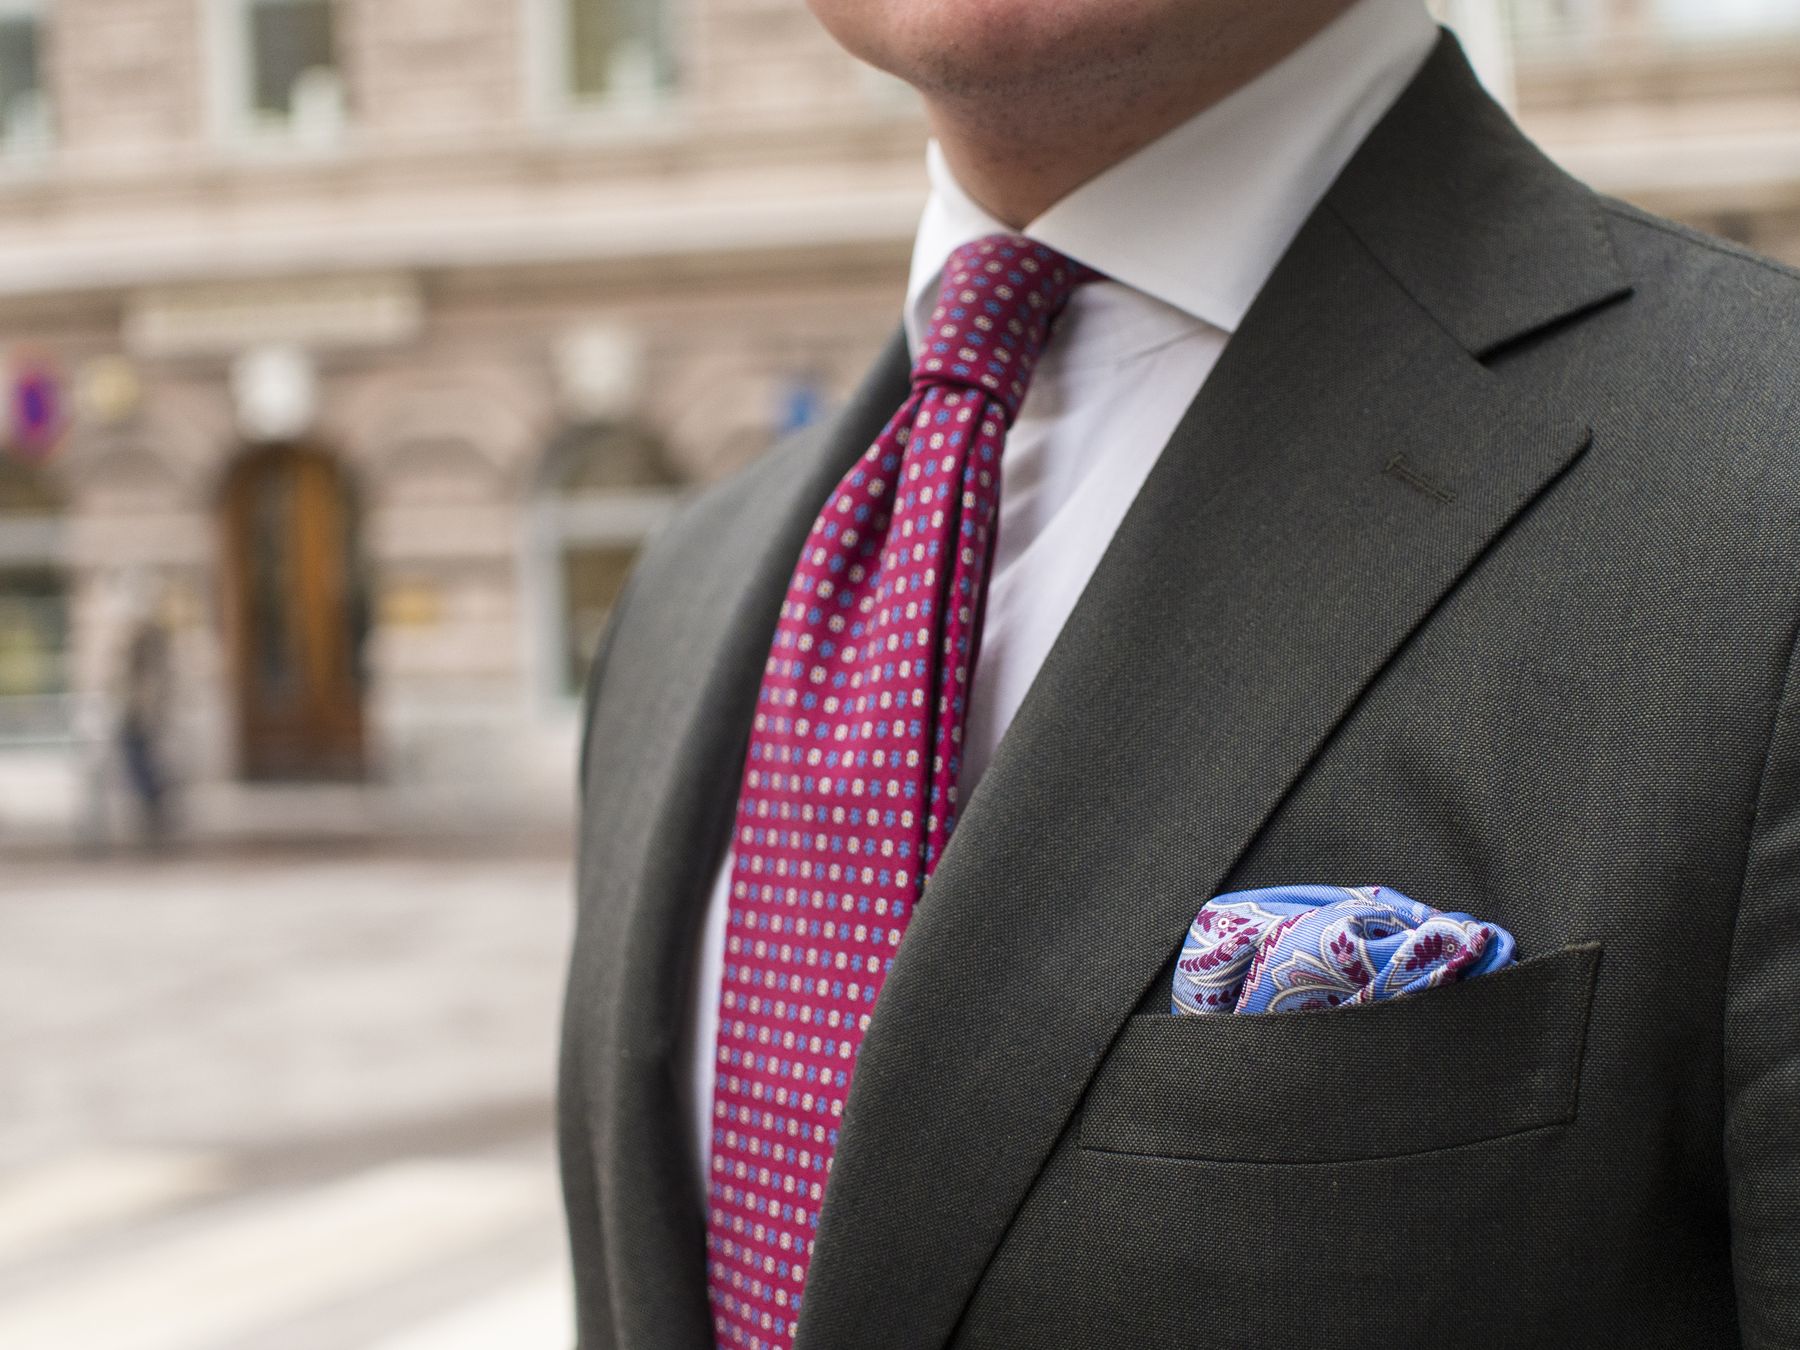 Guide: How to Combine Your Pocket Square and Tie